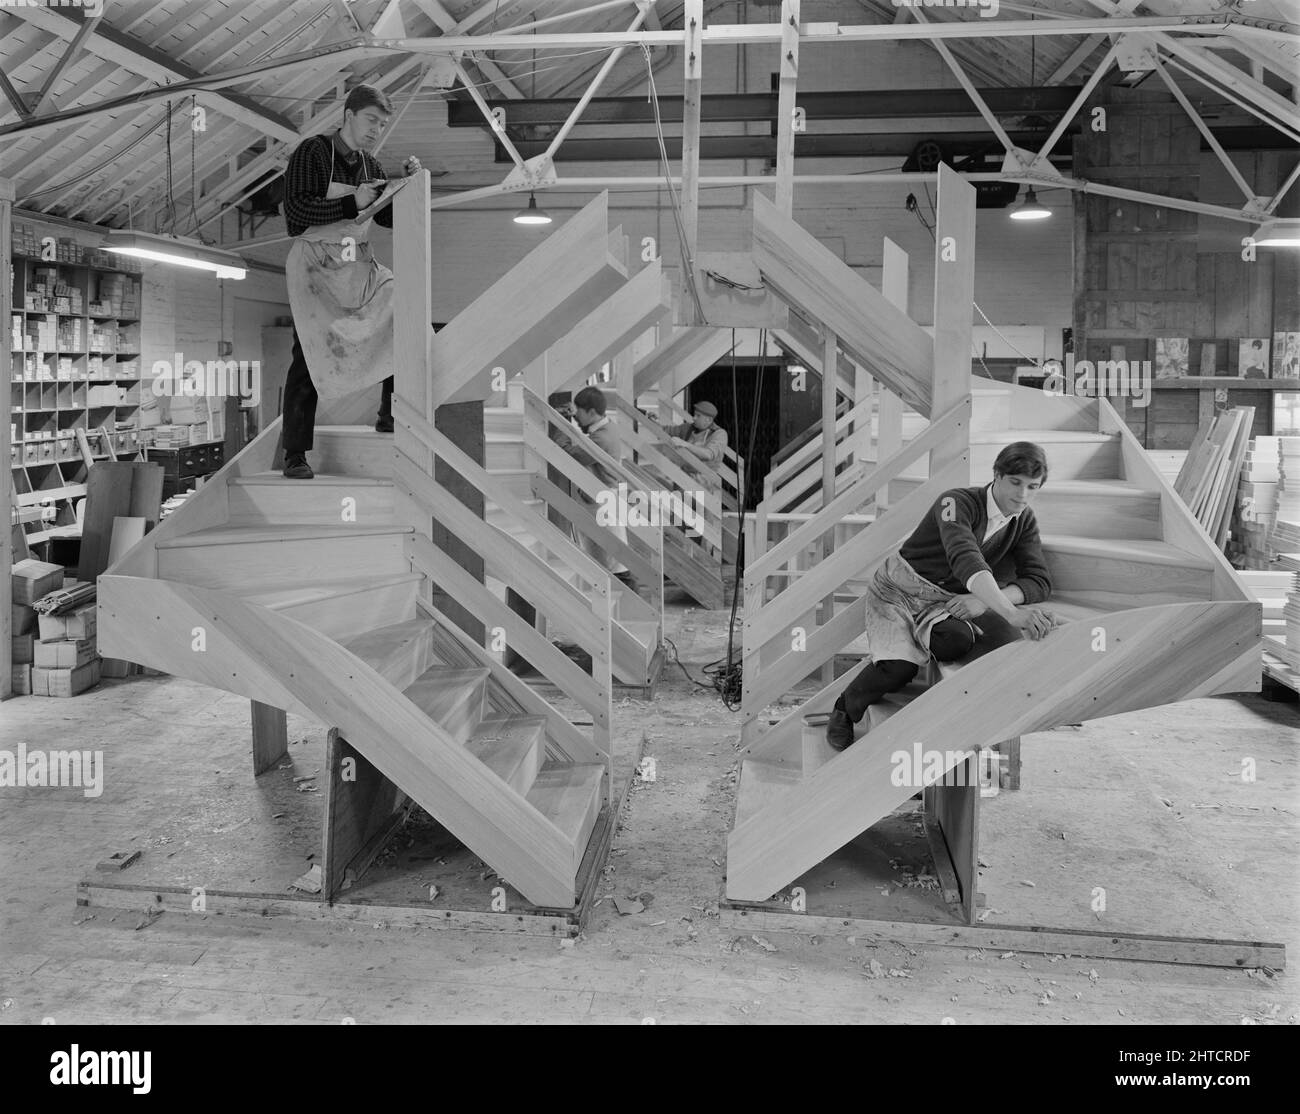 Victoria Joinery Works, Magdalen Street, Earlsfield, Wandsworth, London, 25/11/1966. The interior of Victoria Joinery Works, showing a team of men at work on the manufacture of wooden staircases for 12M Jespersen dwellings. Victoria Joinery Ltd was originally part of the Holloway Brothers group, acquired by John Laing &amp; Son Ltd in 1964. The works was on Magdalen Street in Earlsfield but has since been demolished and housing now occupies the site. The photograph is part of a batch showing staircases manufactured at the works, later to be installed in Laing's 12M Jespersen homes. Stock Photo